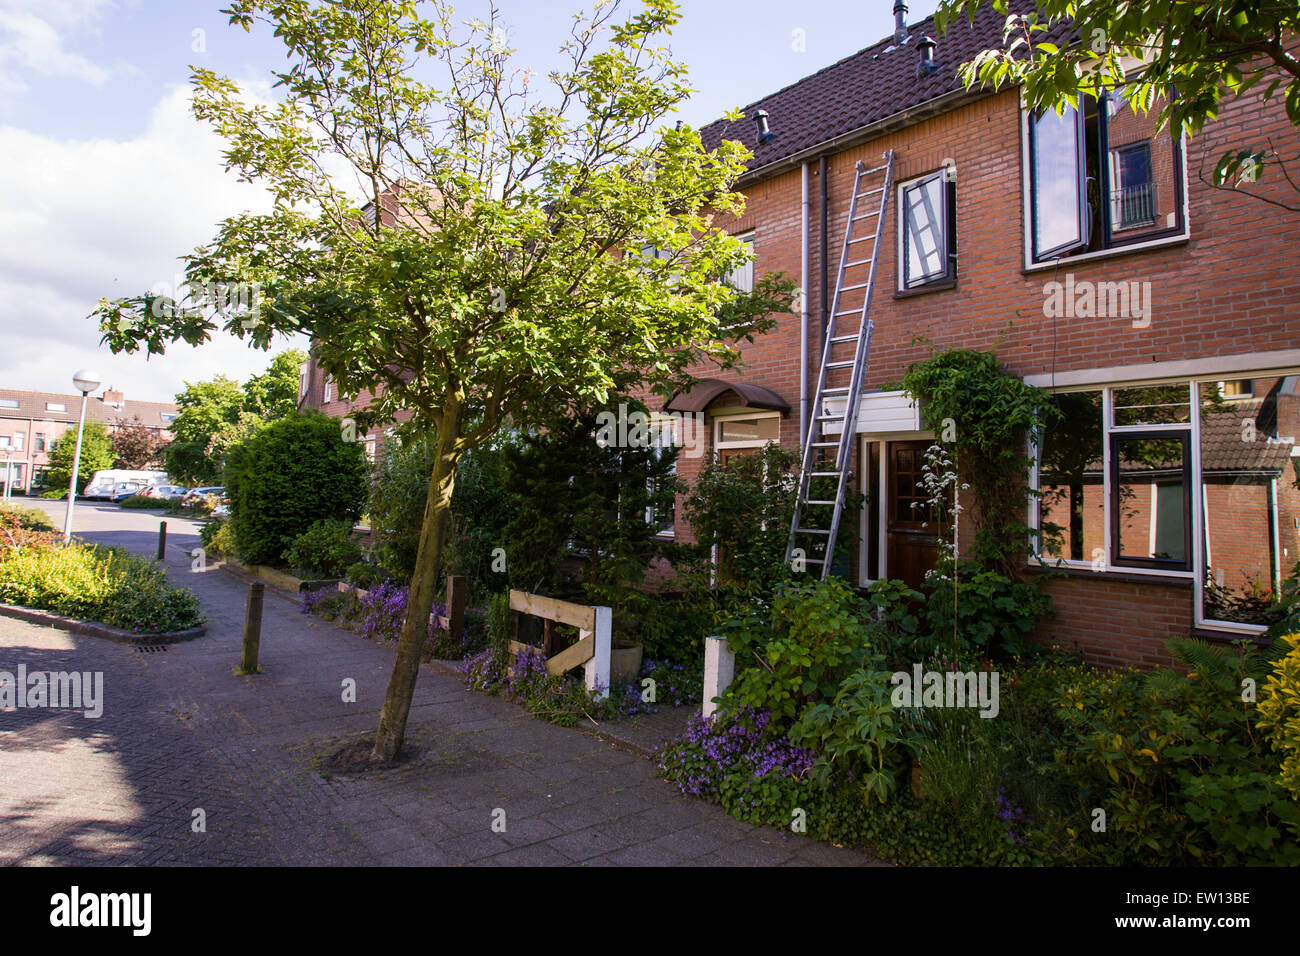 A ladder is seen leaning against a house in a Dutch suburb. Stock Photo